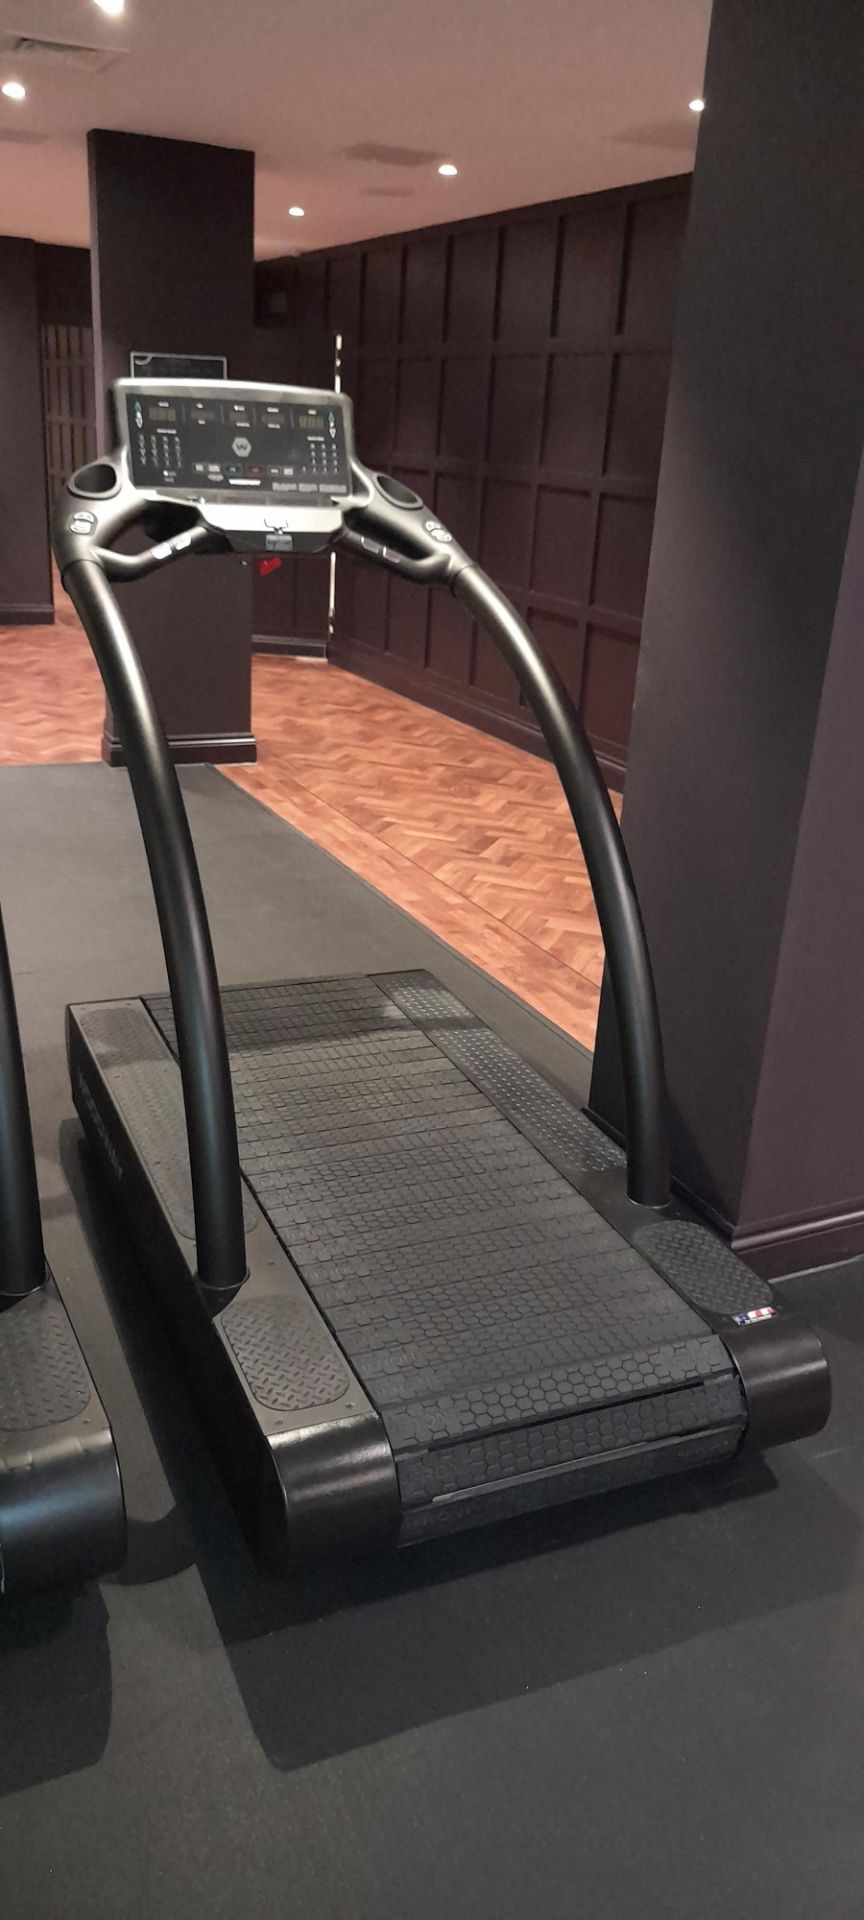 Woodway 4 front slatted belt commercial fitness treadmill Serial number 558100620 - Image 2 of 5